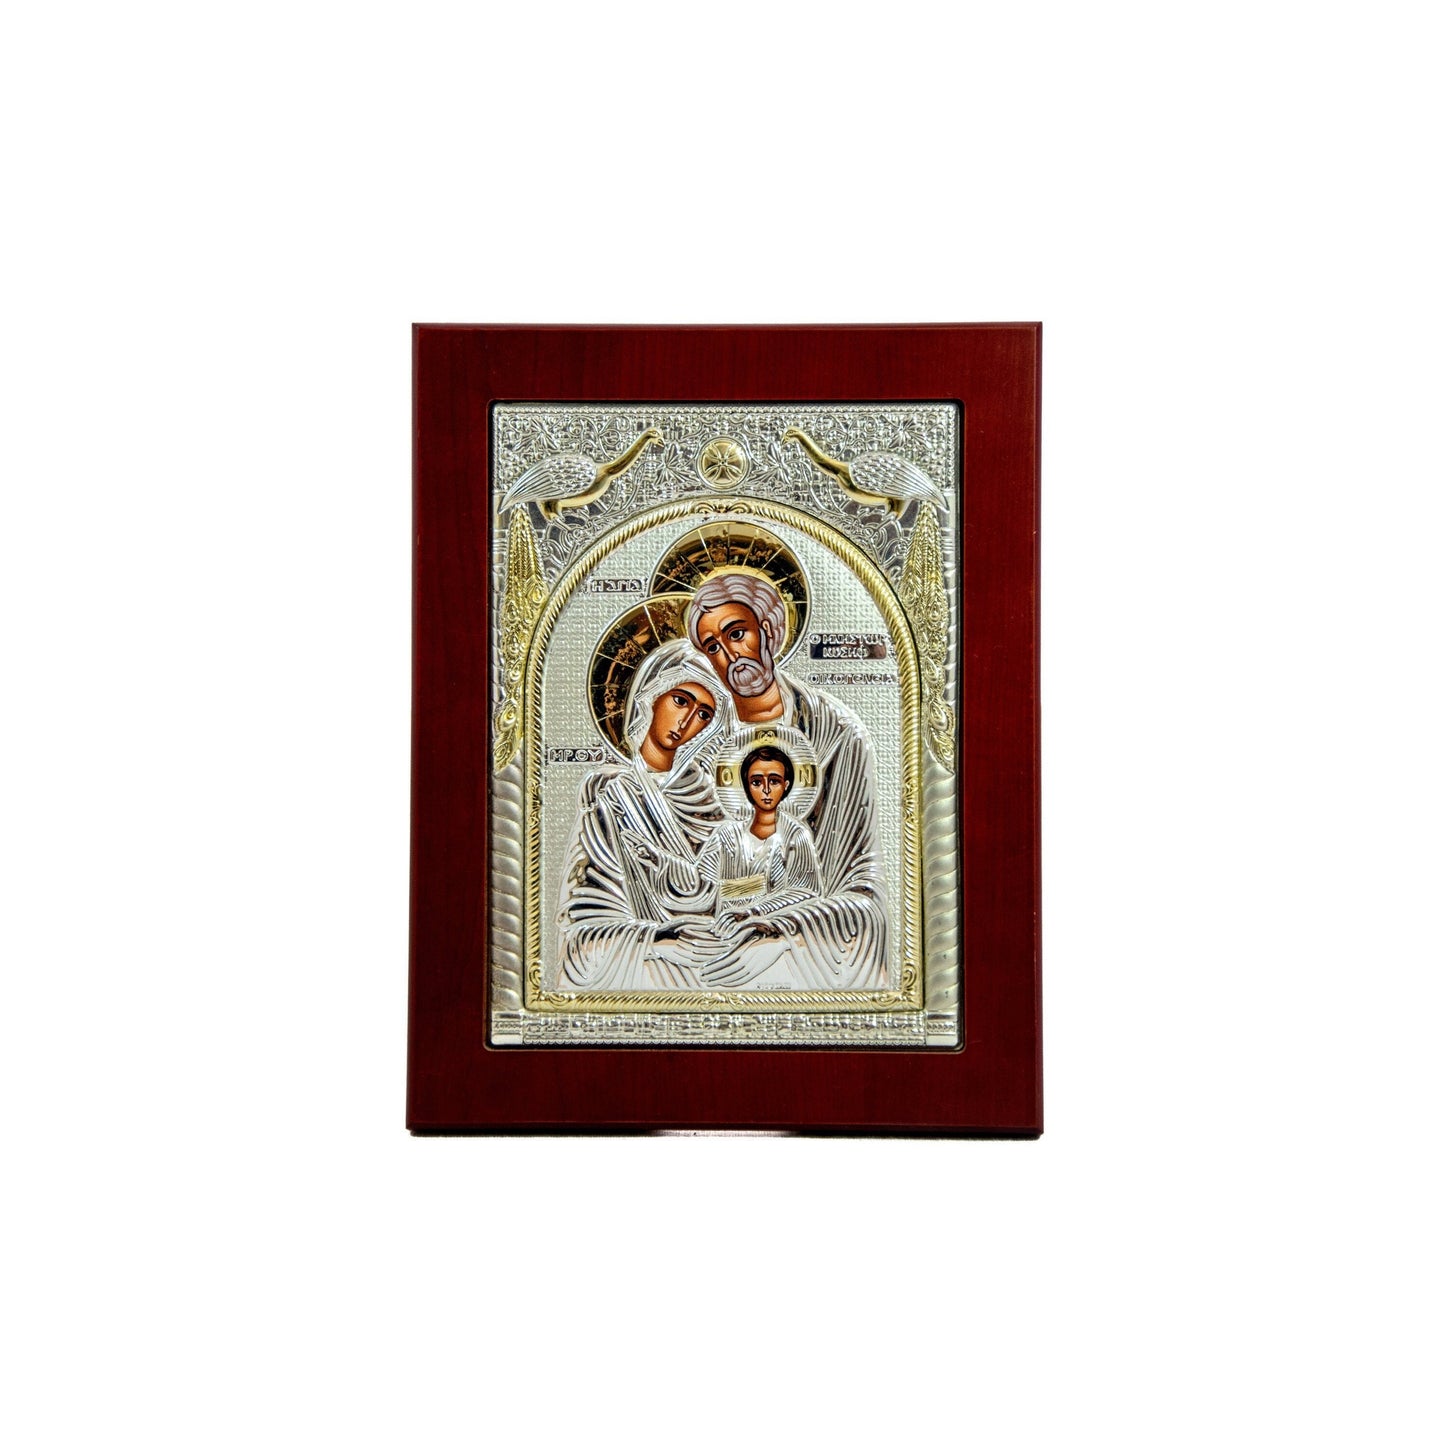 The Holy Family icon, Handmade Silver Greek Orthodox icon 24x18cm, Byzantine art wall hanging on wood plaque icon, religious icon home decor TheHolyArt